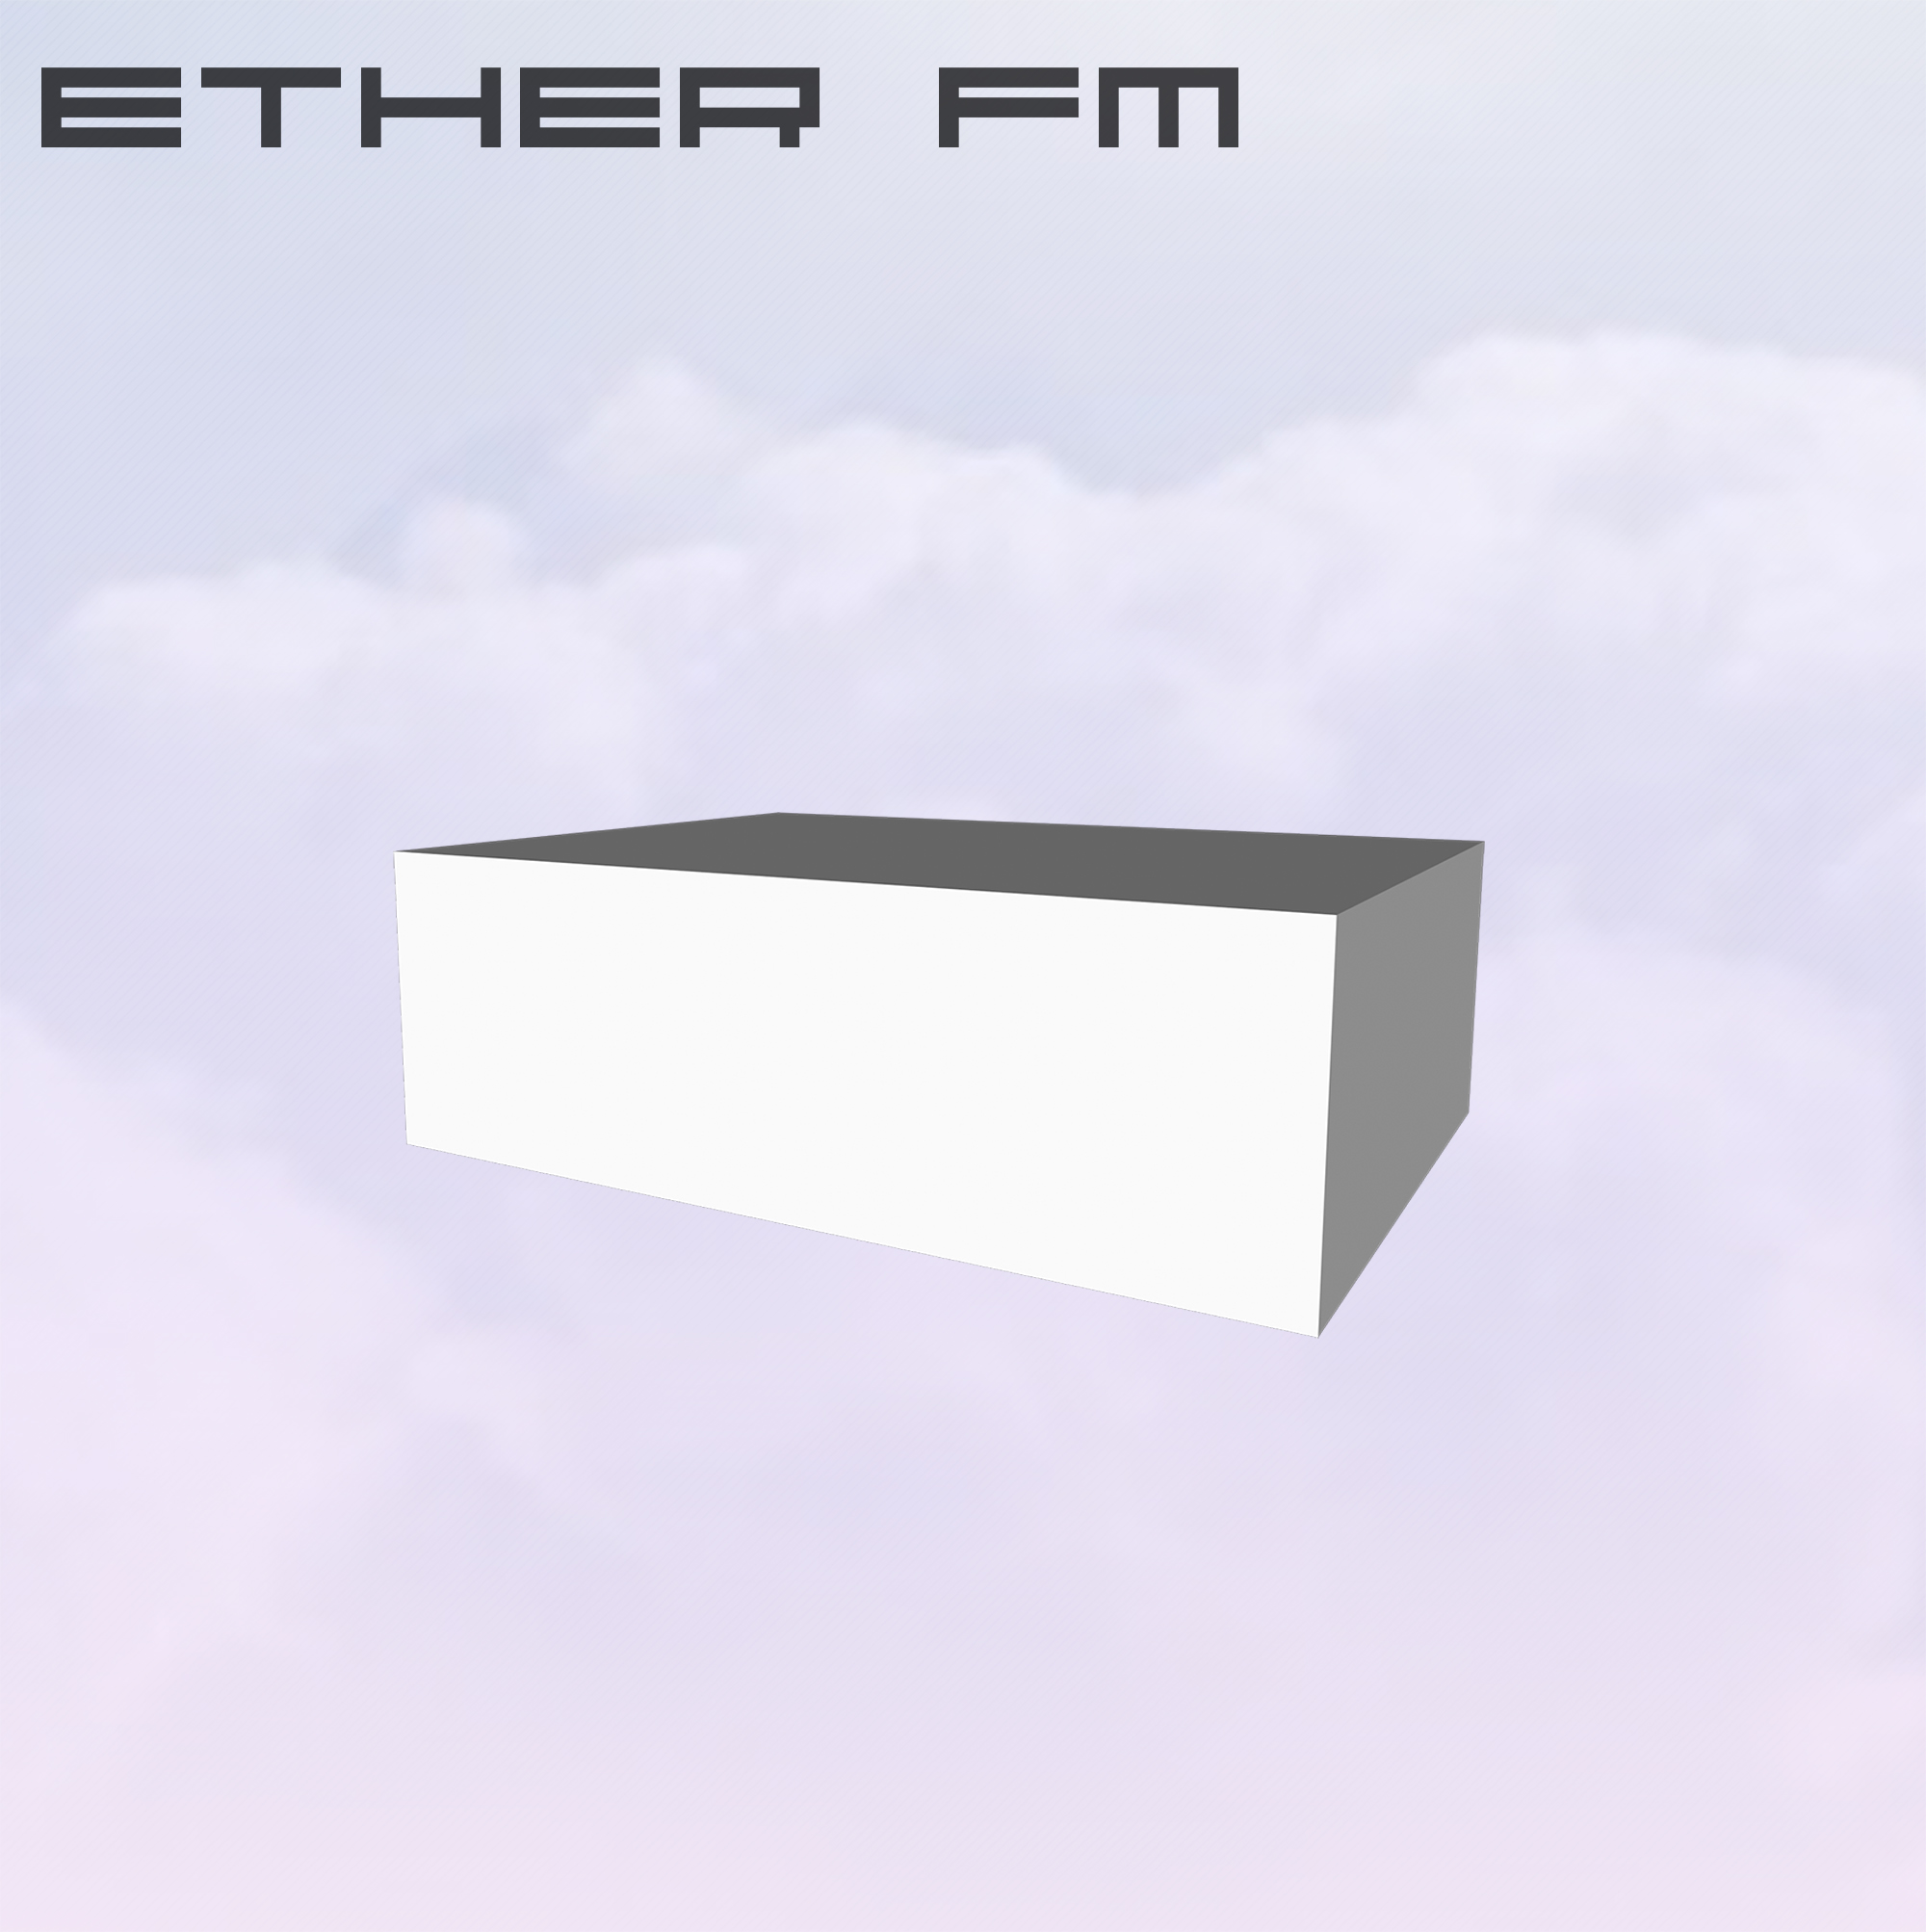 ether_cover.jpg